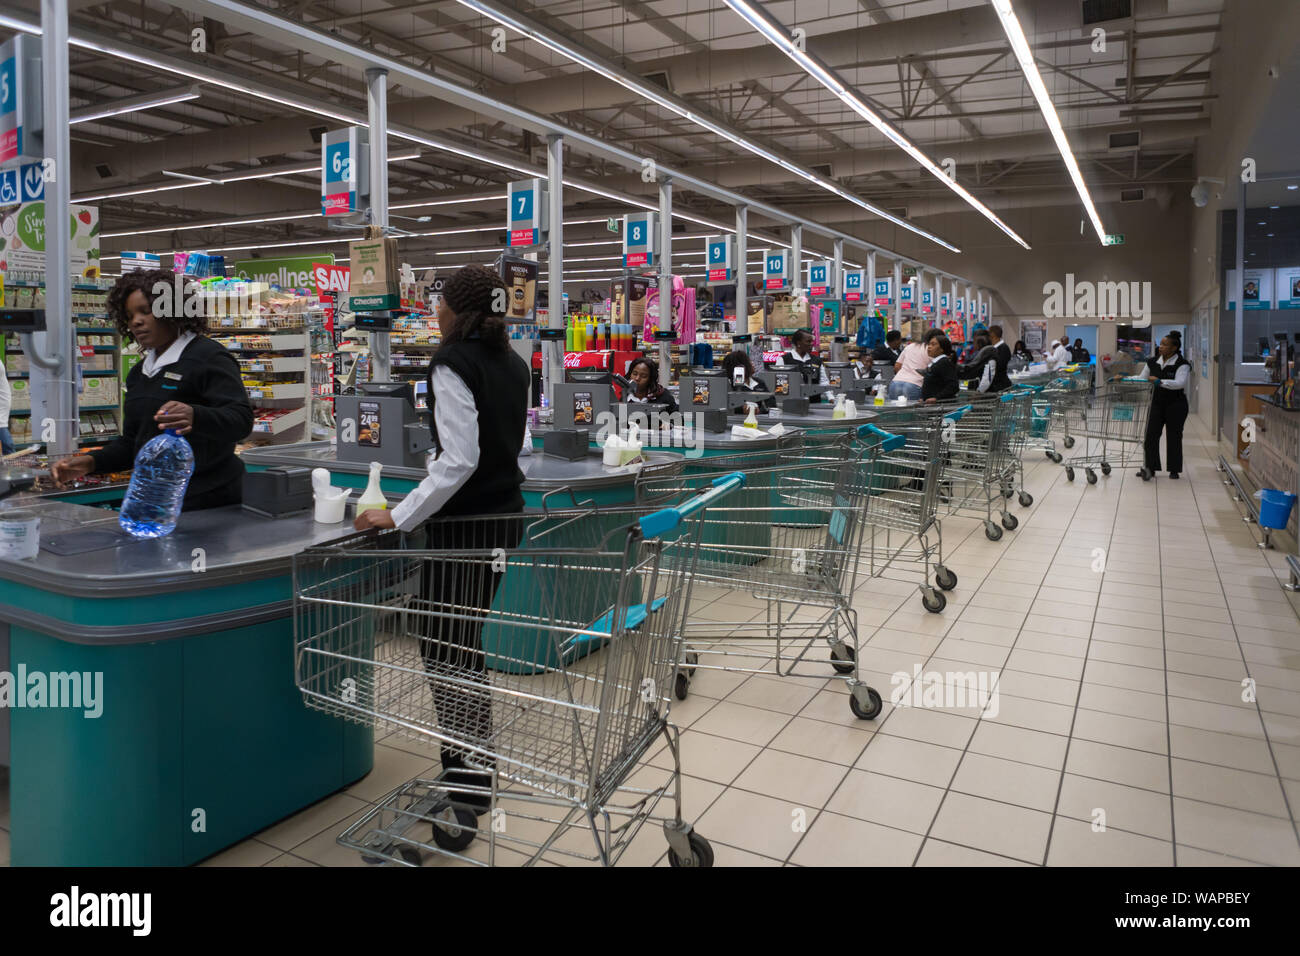 Interior of an African supermarket with many cash pay points or till points and people in Hazyview, Mpumalanga, South Africa concept Africa retailer Stock Photo